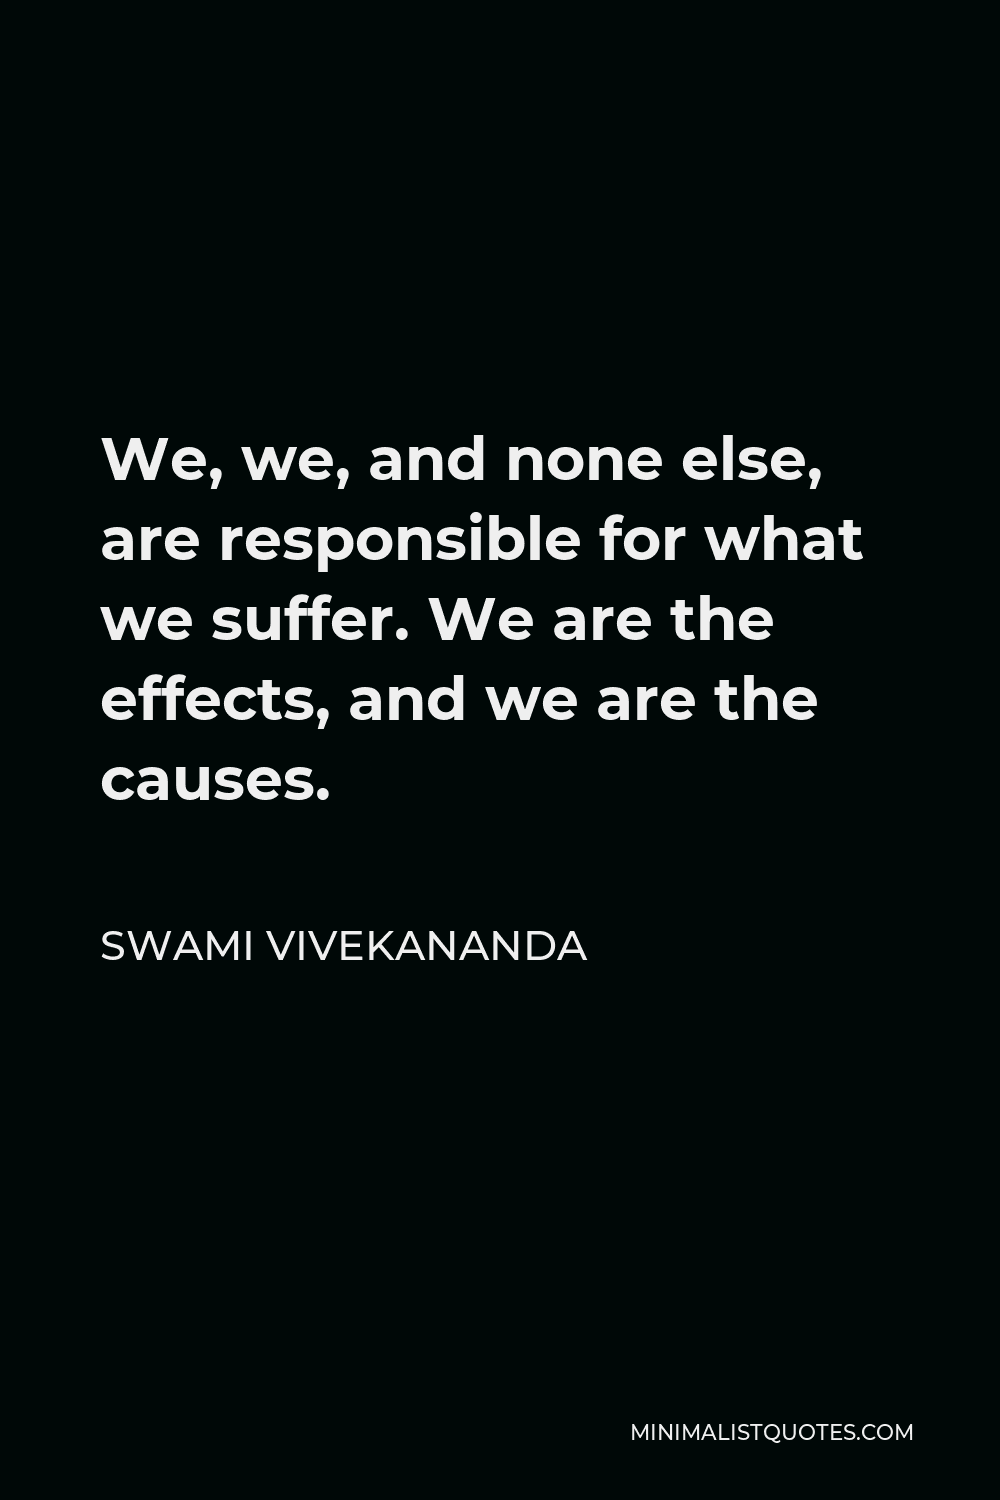 Swami Vivekananda Quote - We, we, and none else, are responsible for what we suffer. We are the effects, and we are the causes.